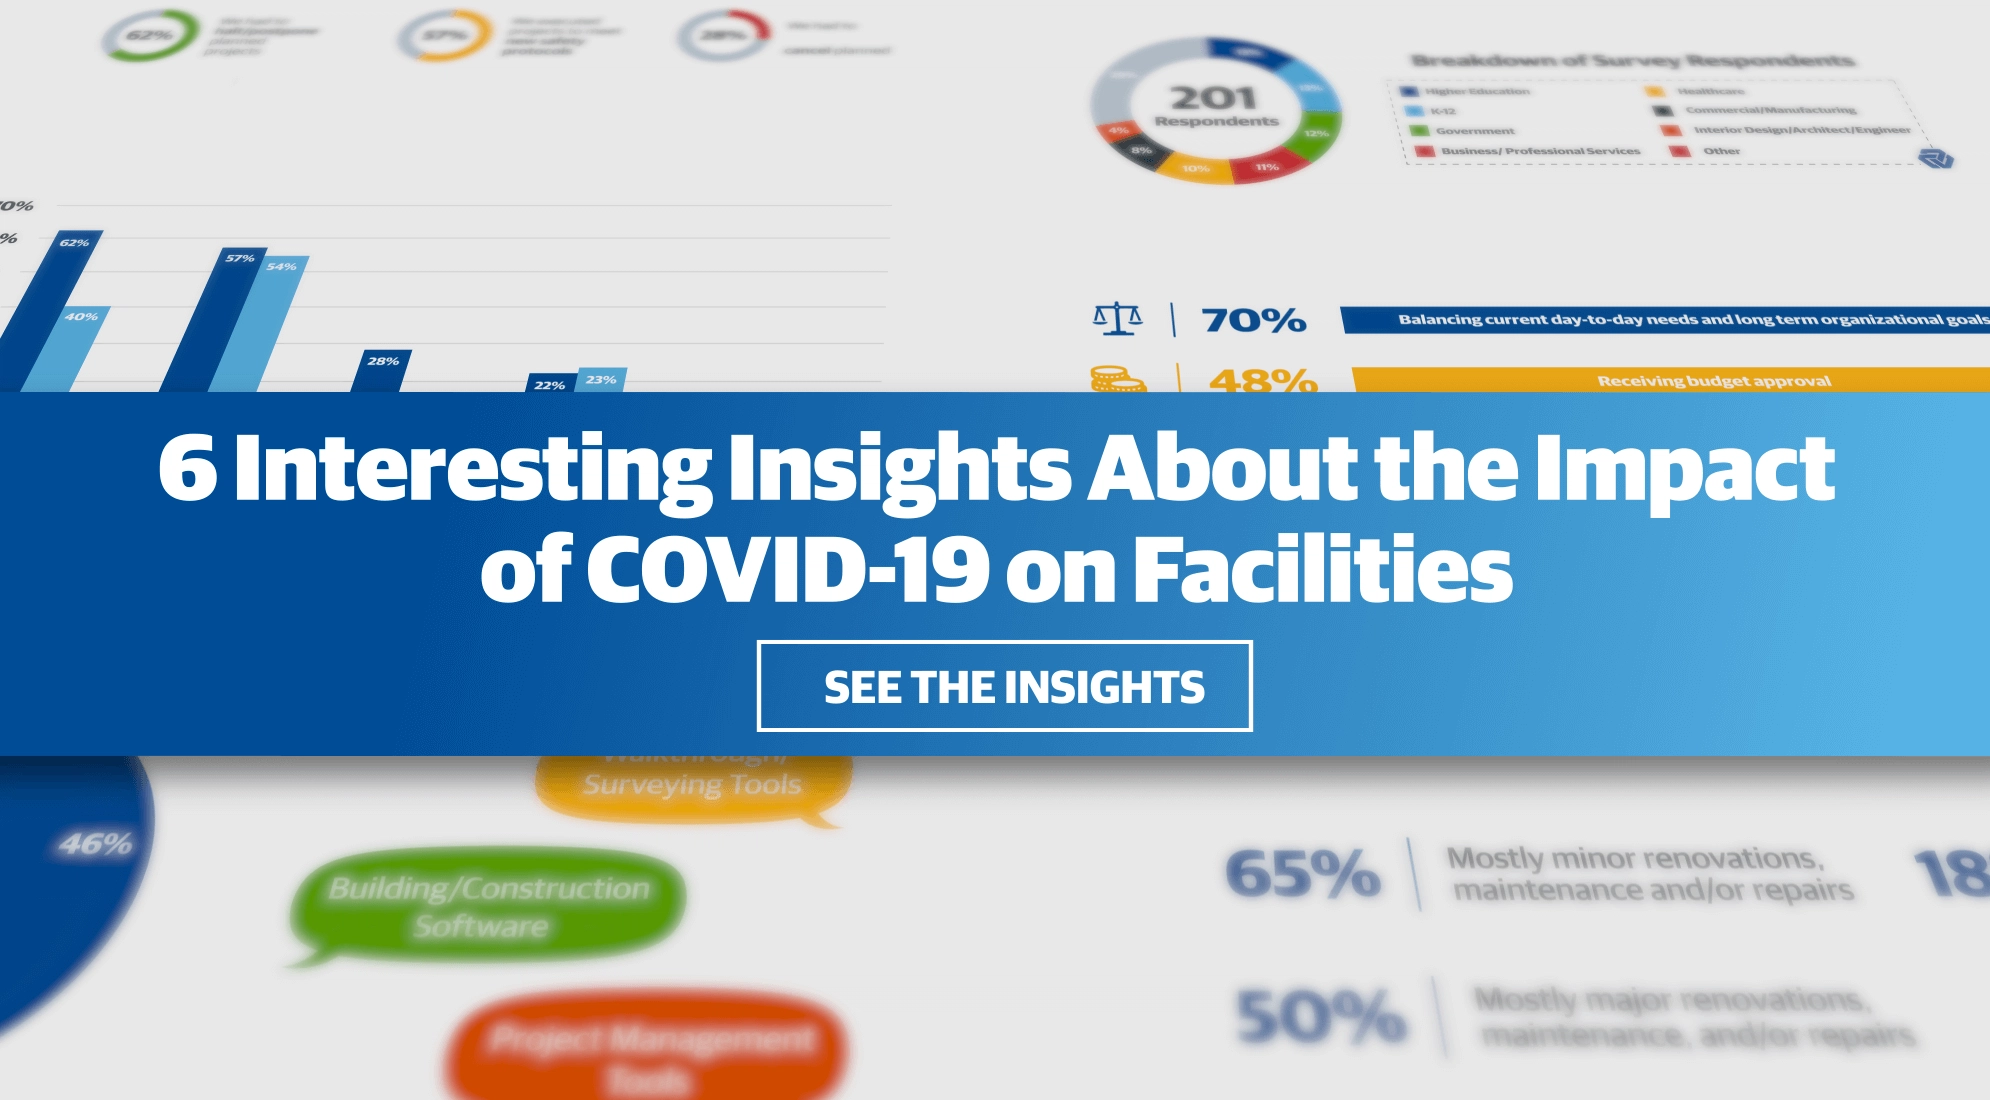 6 Interesting Insights About the Impact of COVID-19 on Facilities 4